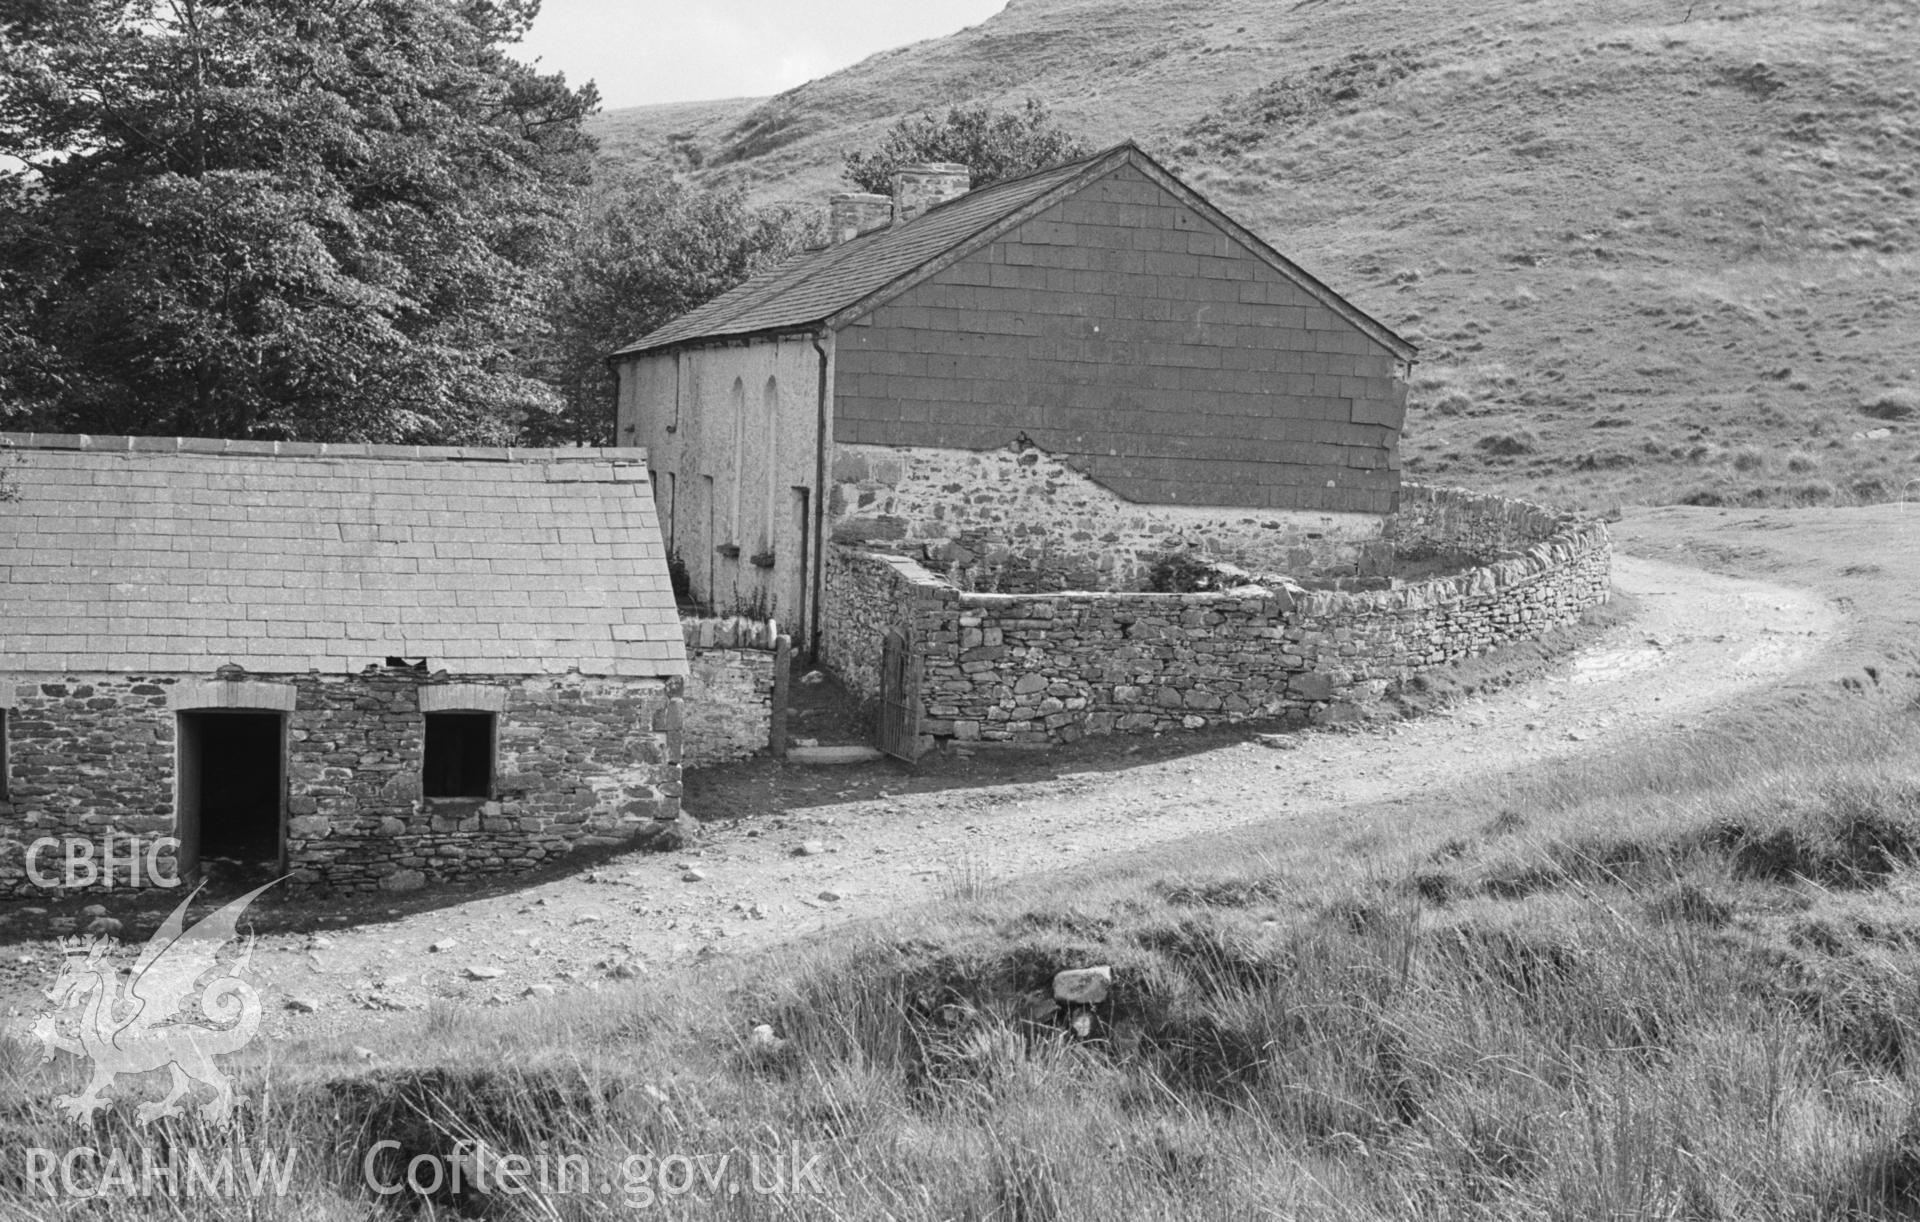 Digital copy of a black and white negative showing exterior side elevation of Soar-y-Mynydd, Llanddewi Brefi. Photographed in September 1963 by Arthur O. Chater from Grid Reference SN 7845 5331, looking south south east.